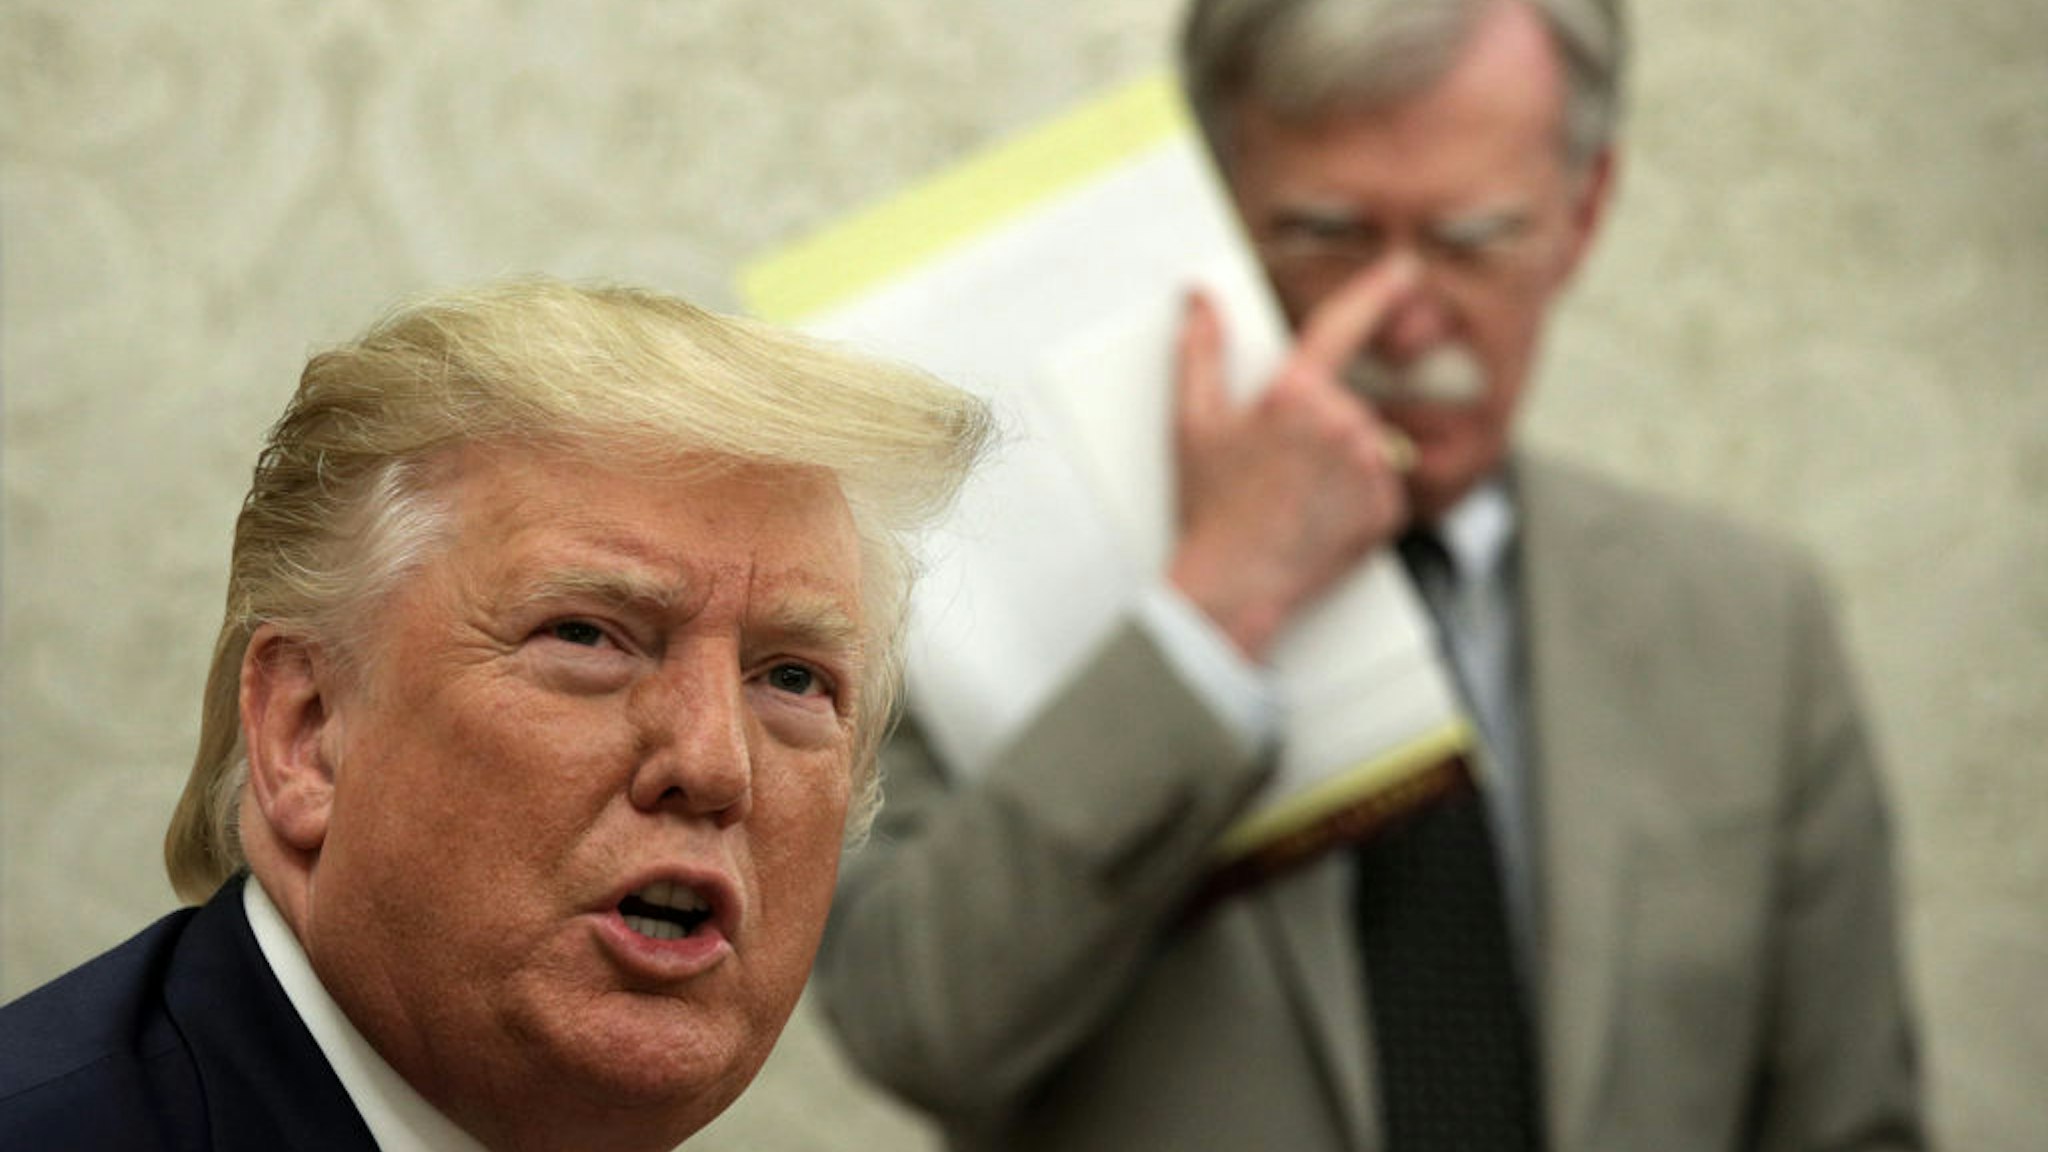 WASHINGTON, DC - AUGUST 20: U.S. President Donald Trump speaks to members of the media as National Security Adviser John Bolton listens during a meeting with President of Romania Klaus Iohannis in the Oval Office of the White House August 20, 2019 in Washington, DC. This is Iohannis‚Äô second visit to the Trump White House and the two leaders are expected to discuss bilateral issues during their meeting.